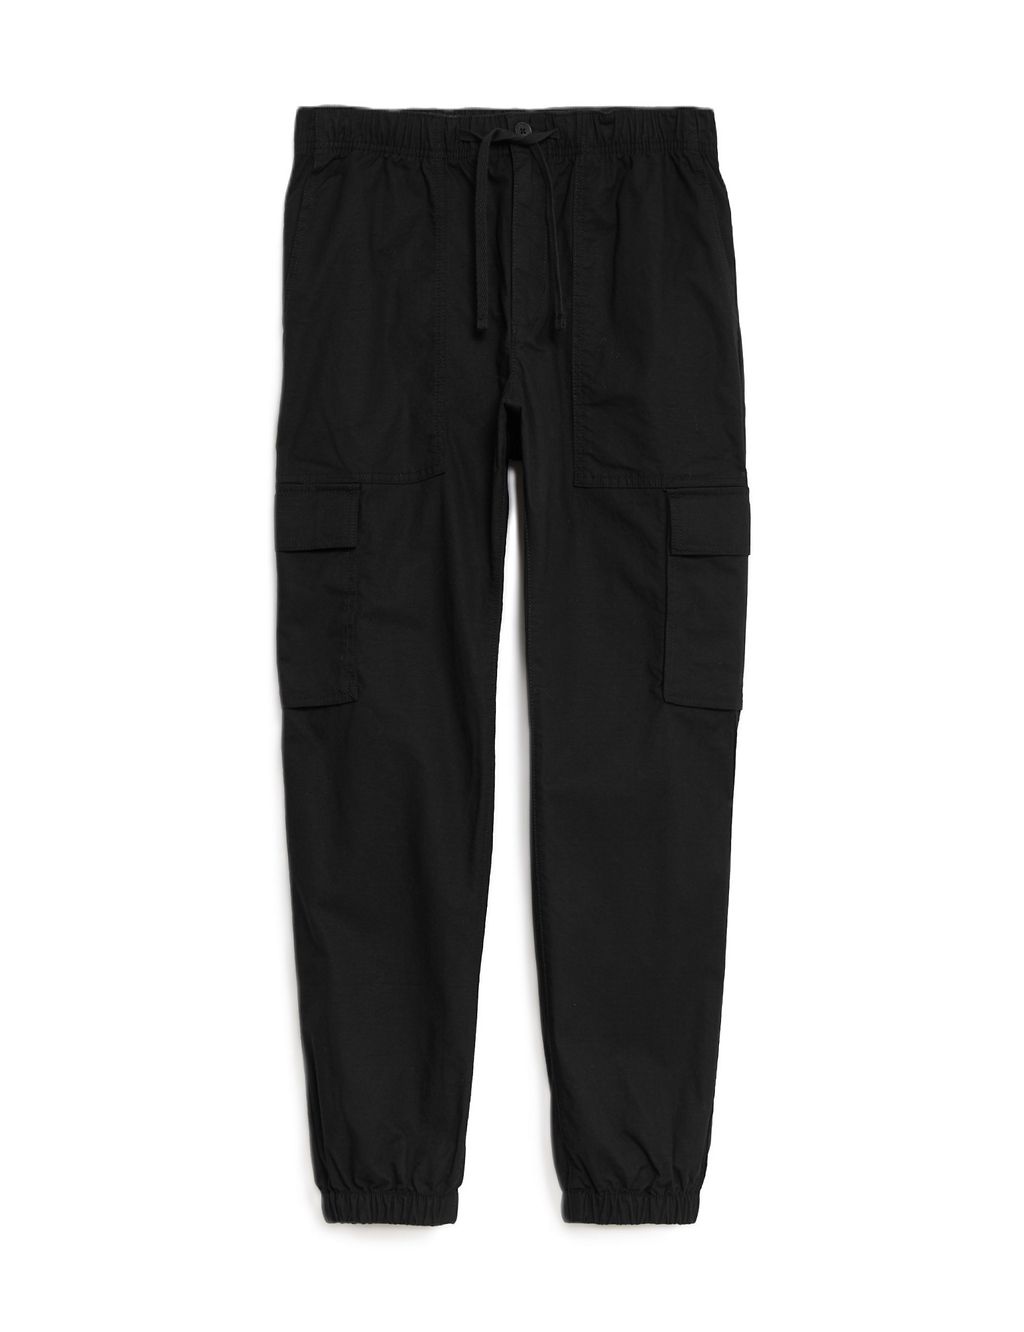 Elasticated Waist Ripstop Cargo Trousers | M&S Collection | M&S